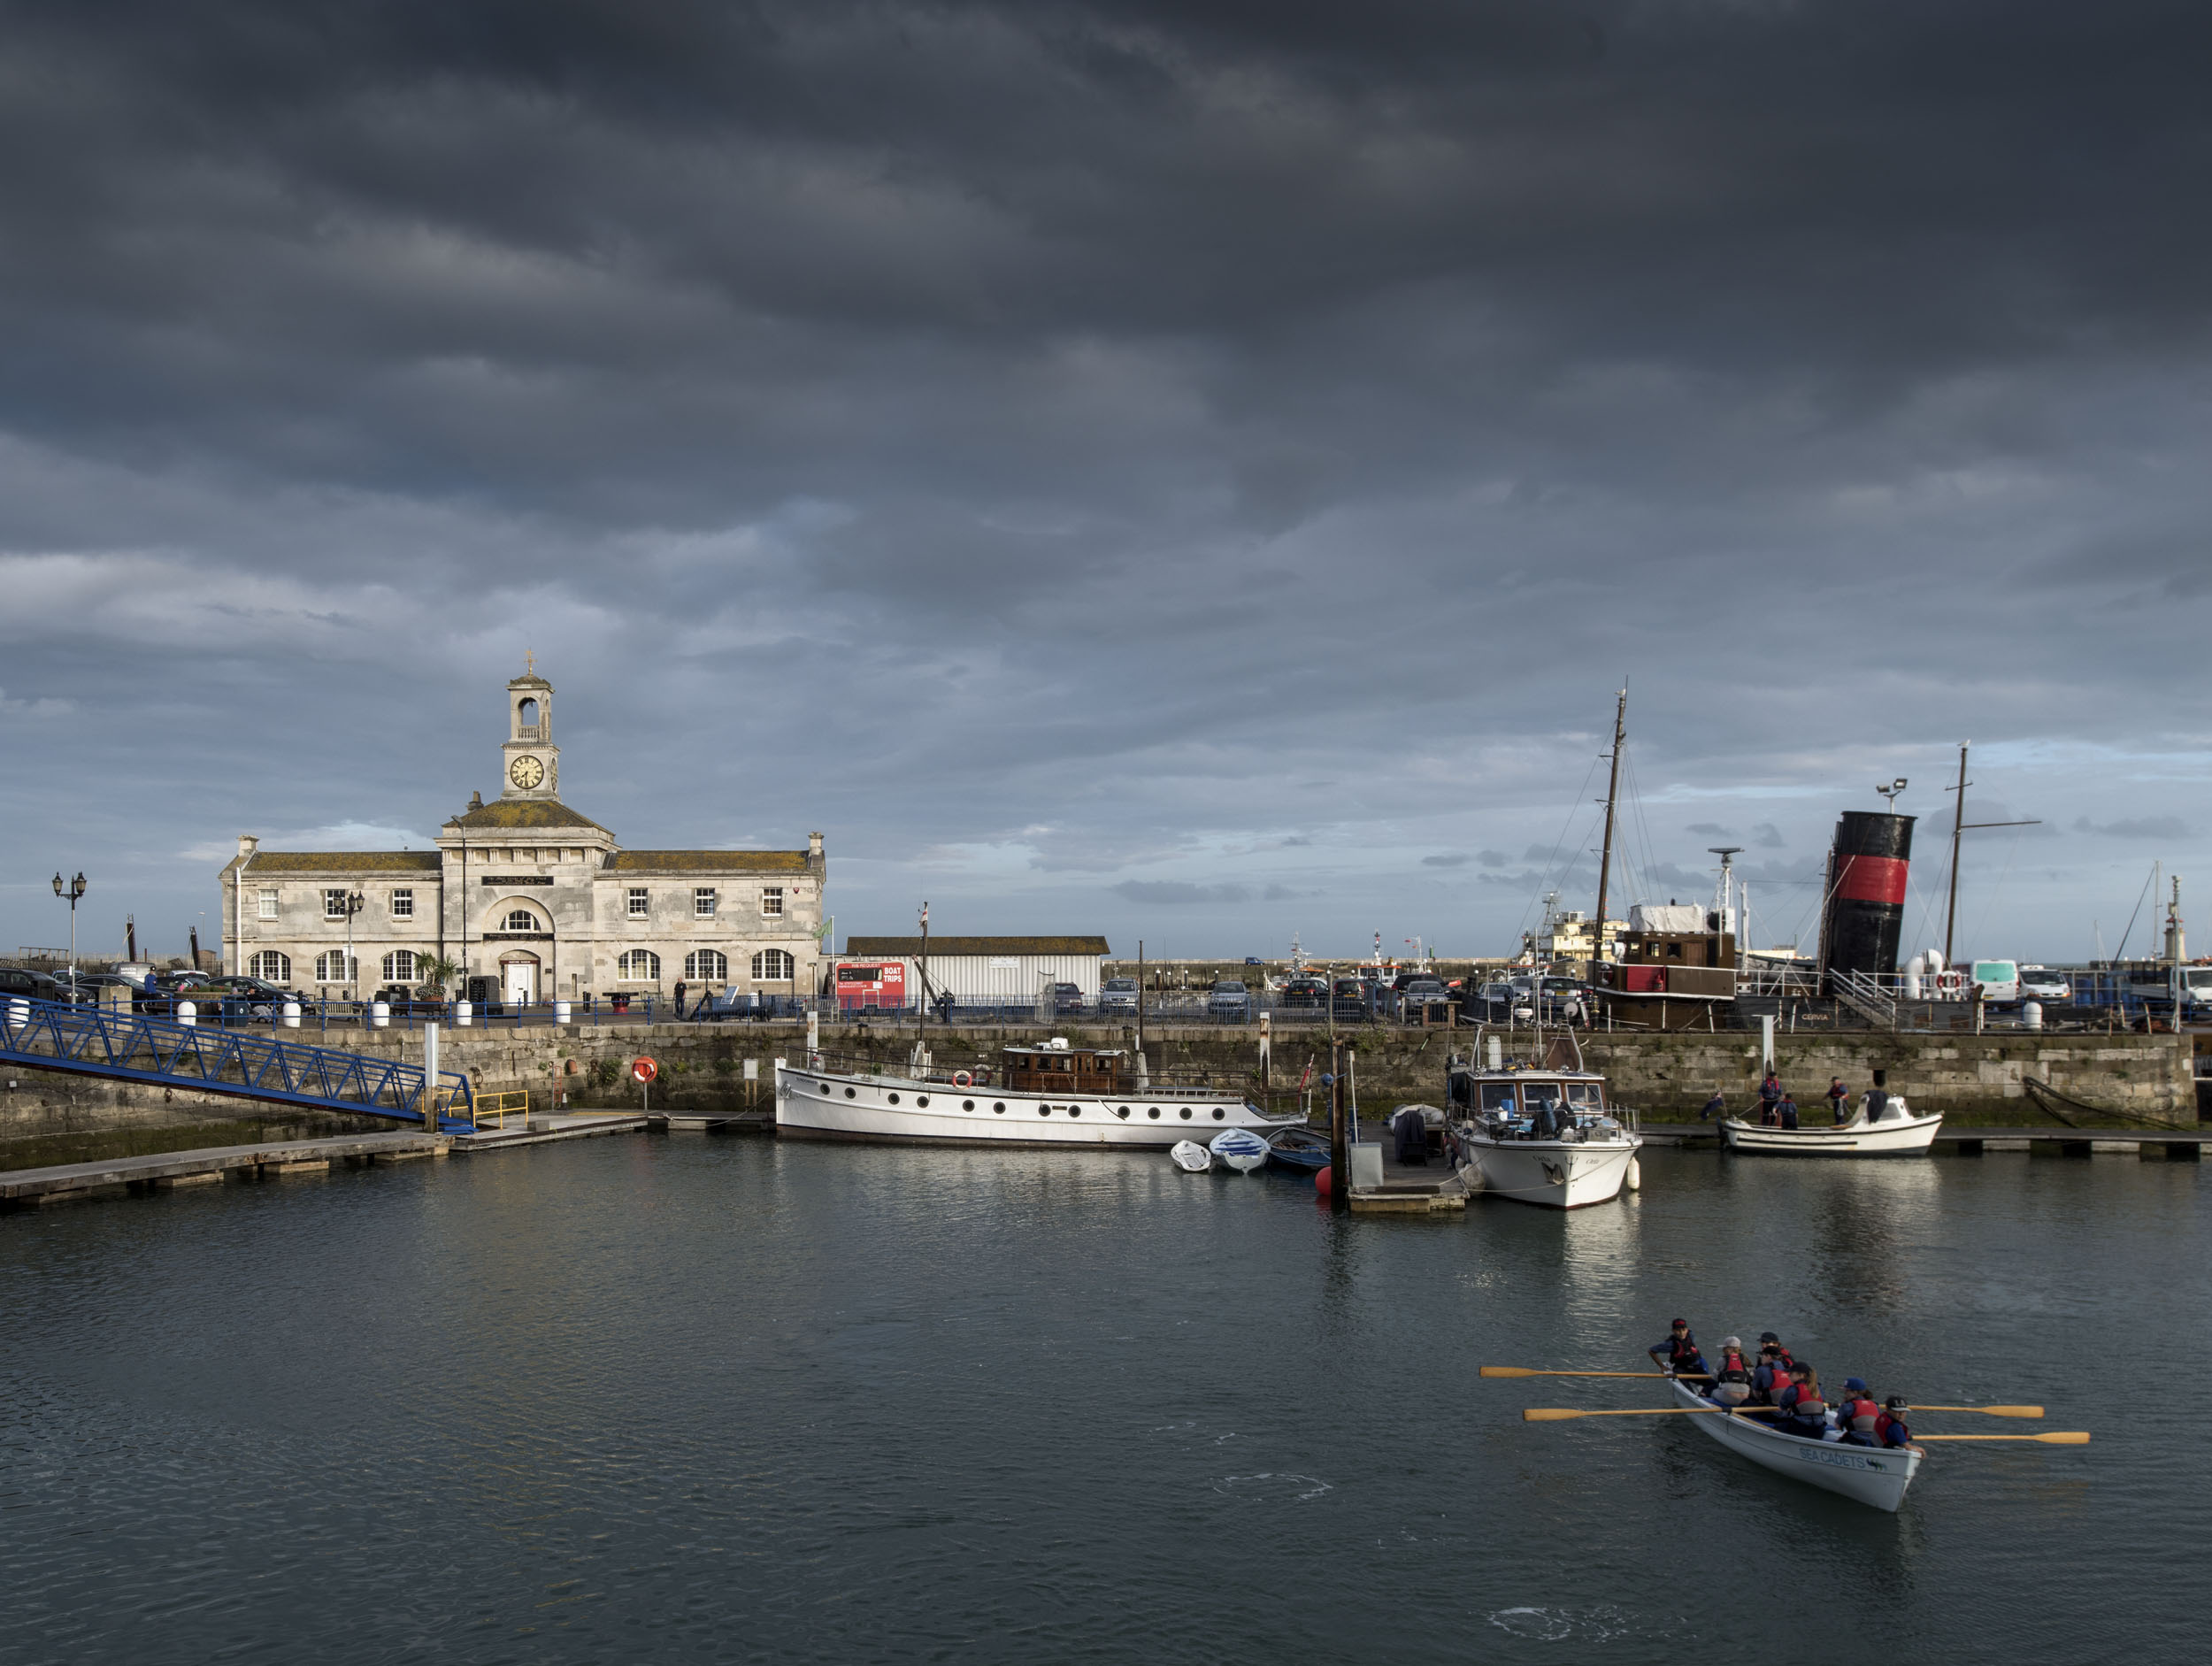 View across Yacht Marina with sea cadets in foreground and the Clock house in the background